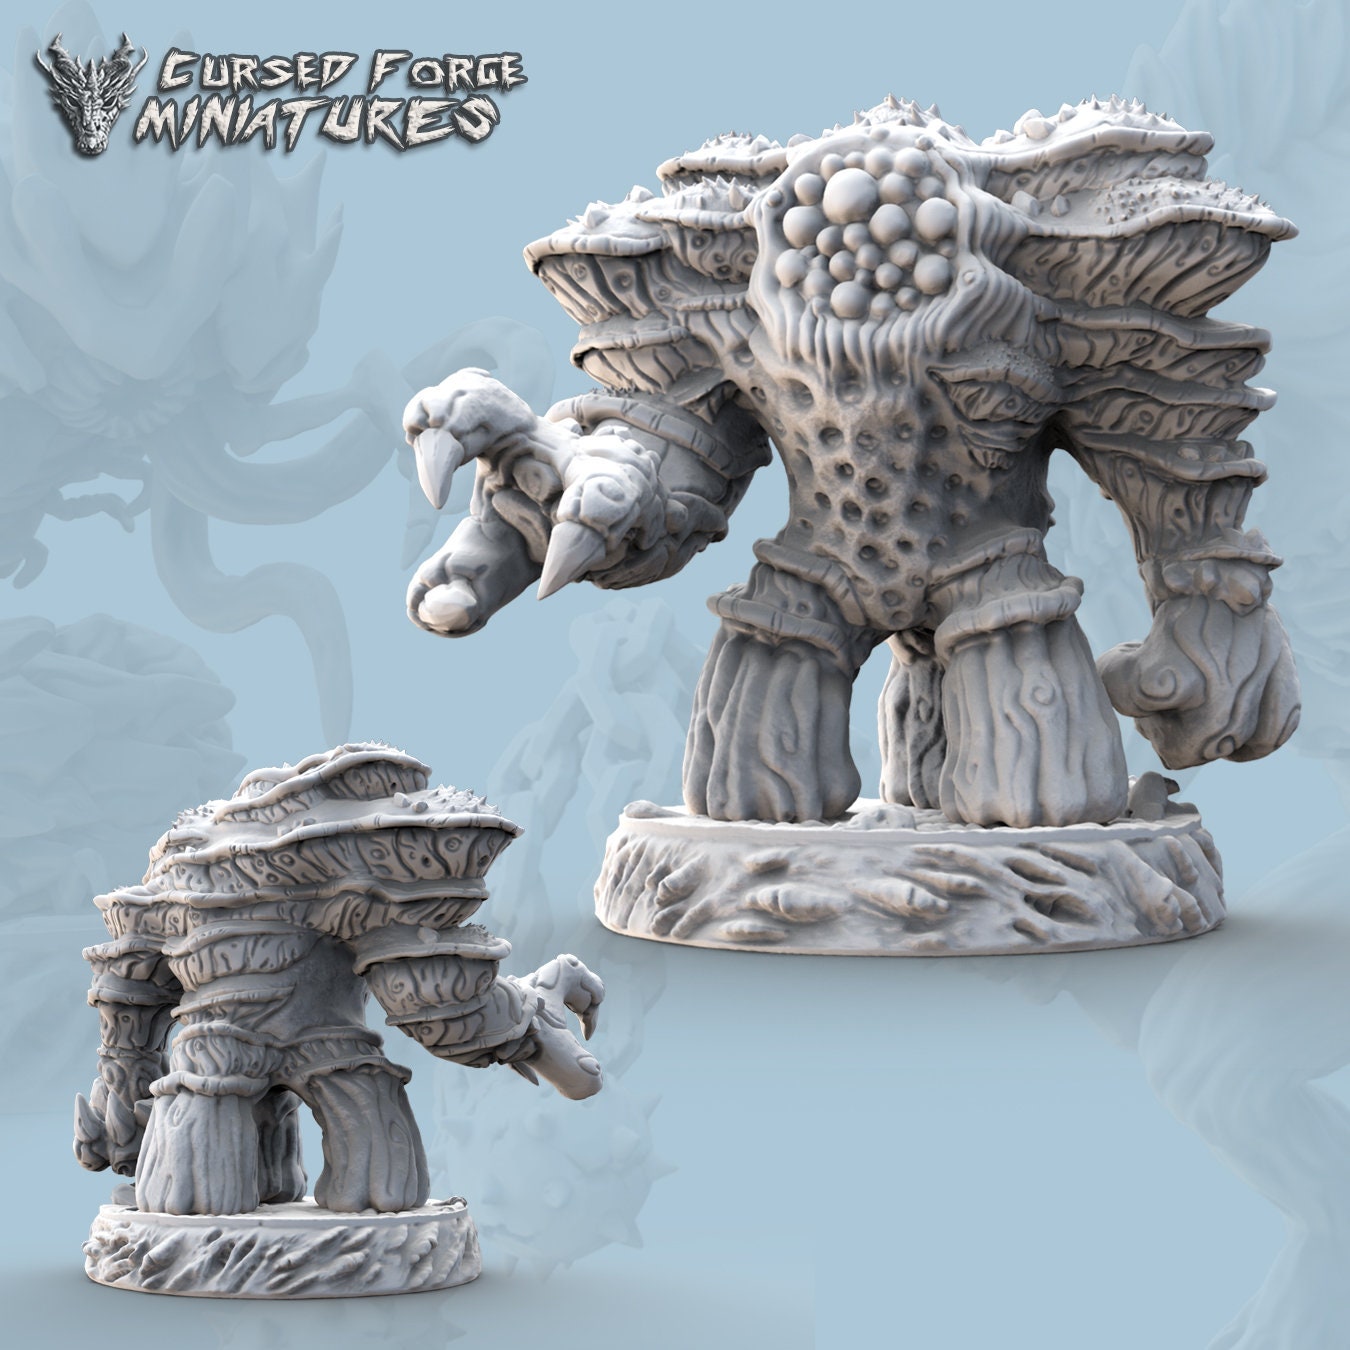 YESTABROD, by Cursed Forge Miniatures // 3D Print on Demand / D&D / Pathfinder / RPG